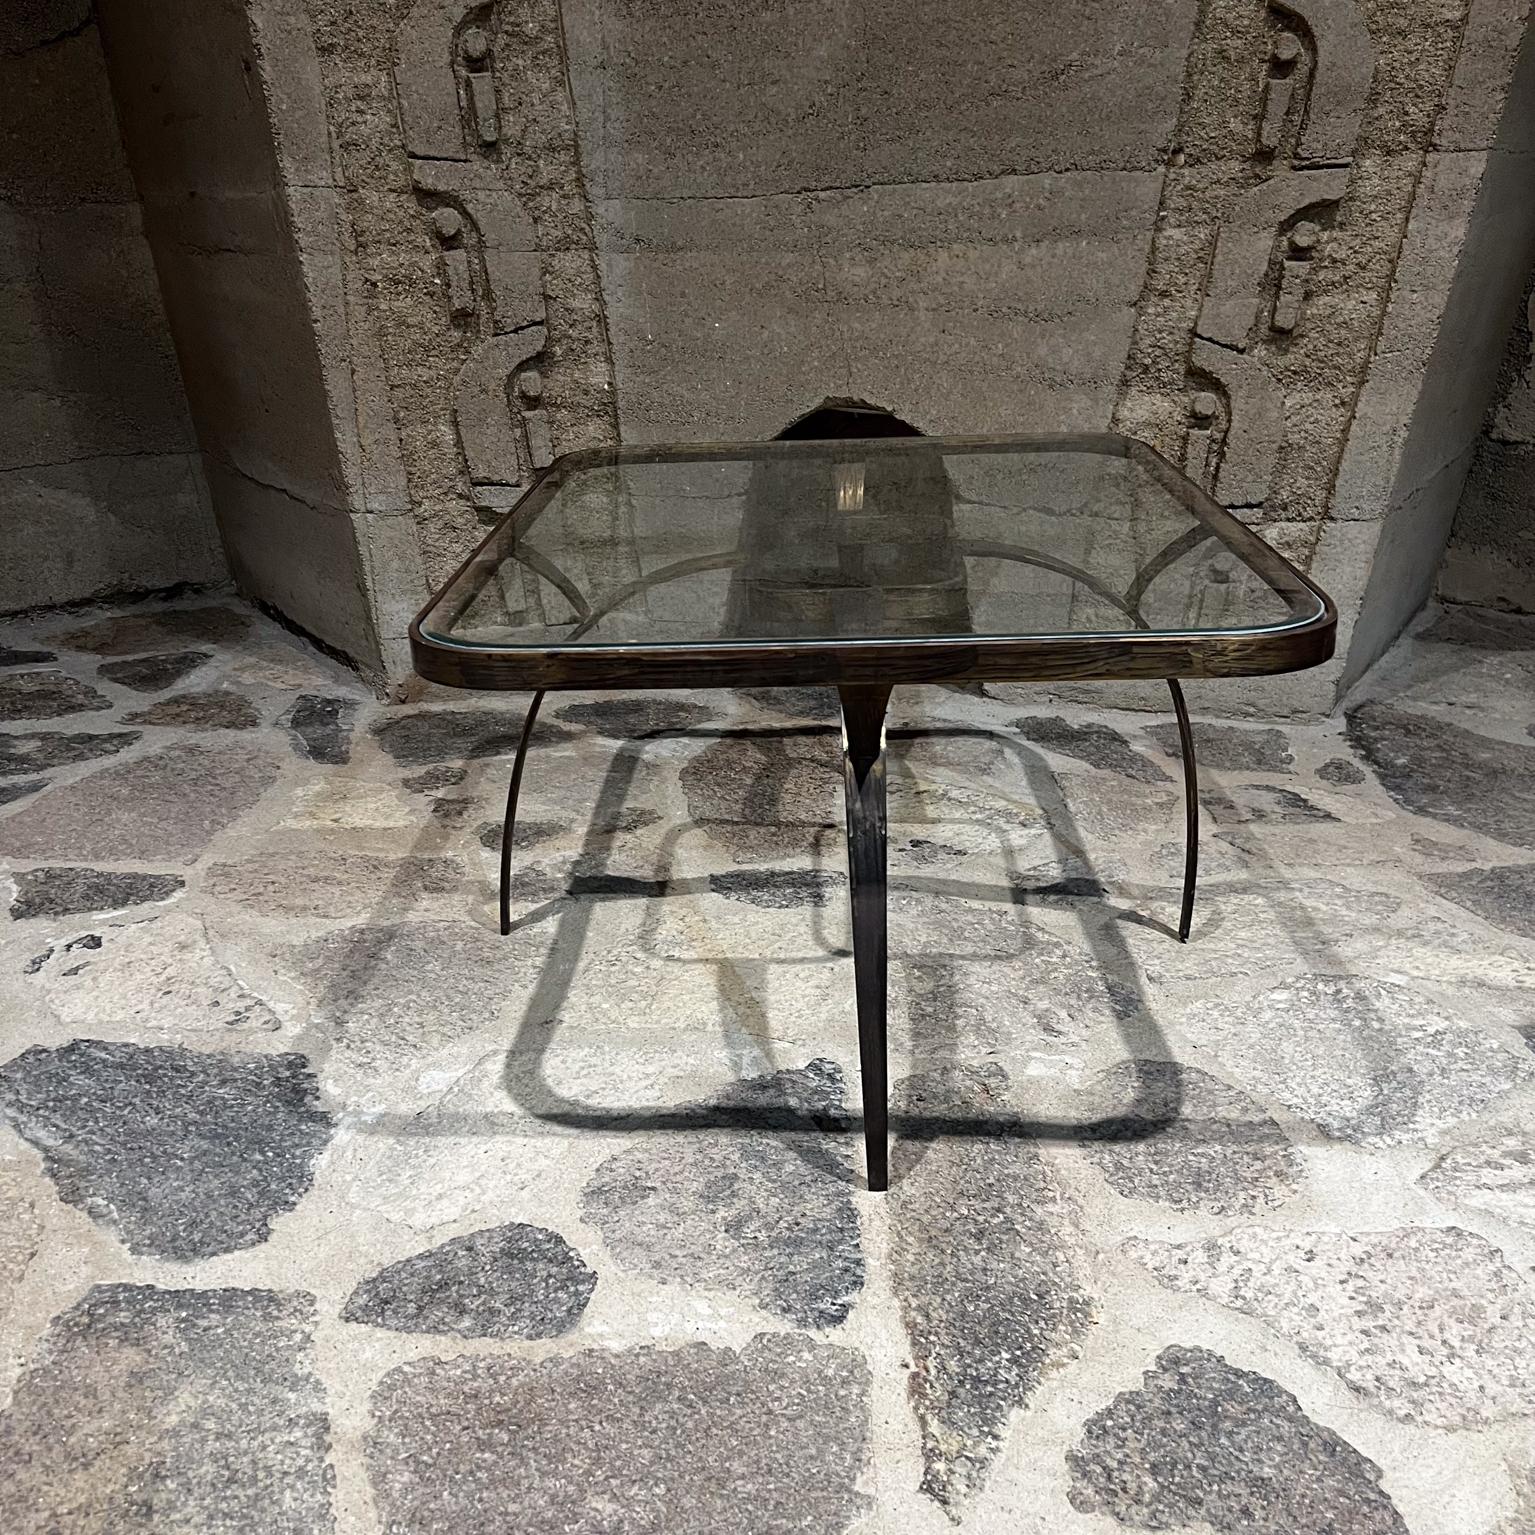 1950s Mexican Modernist side coffee table sculptural bronze
Bronze with glass tabletop. Arturo Pani Mexico City
Unmarked. 
Rectangular shape round corners curvy wishbone legs.
29.5 x 23.5 d x15.25
Original glass with beveled edges.
Unrestored